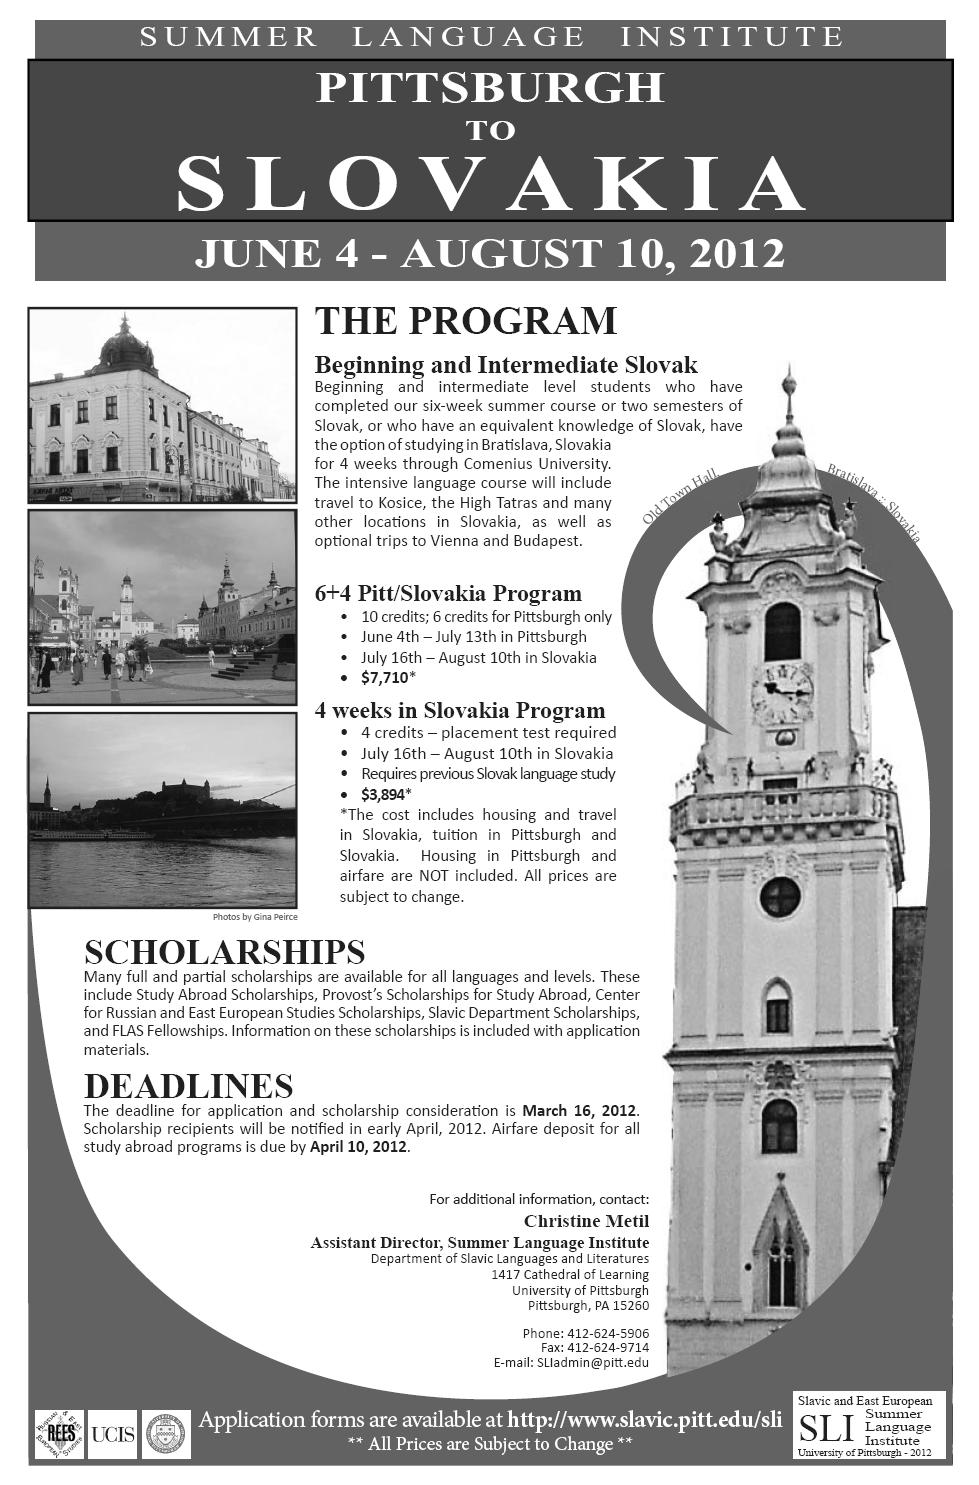 Page 4 SOKOL TIMES FEBRUARY 9, 2012 SLOVAK SUMMER INSTITUTE AT UNIVERSITY OF PITTSBURGH AND BRATISLAVA, SLOVAKIA The intensive Slovak Summer Institute will again be held at the University of